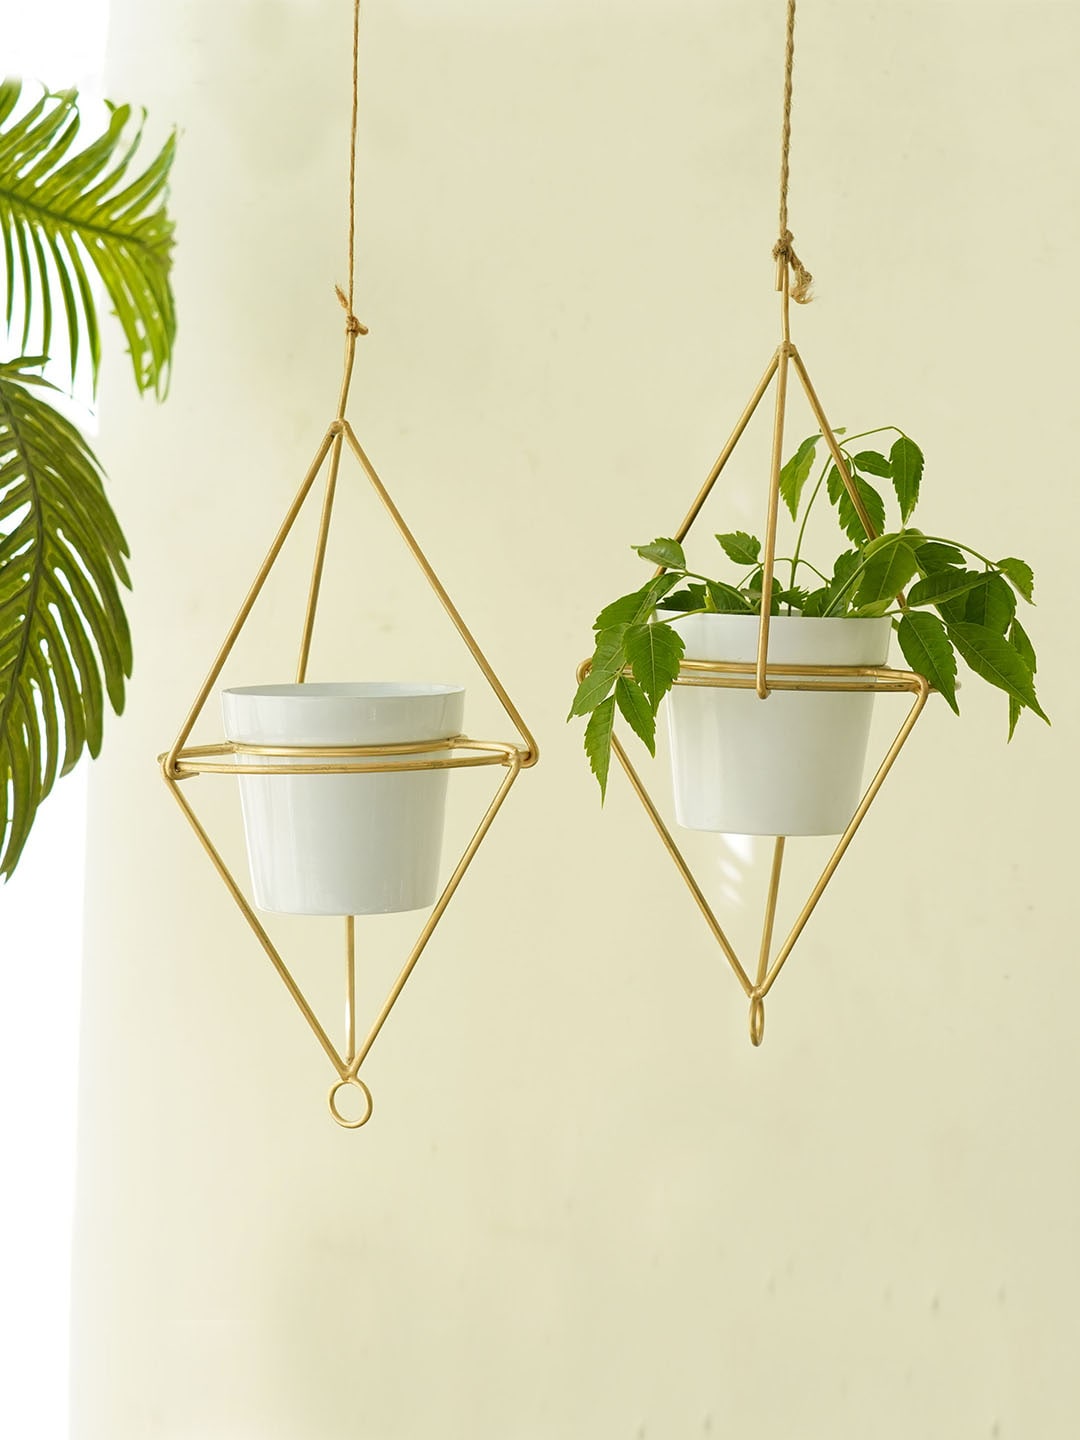 TIED RIBBONS Set Of 2 Gold-Toned & White Metal Planters With Pot Price in India